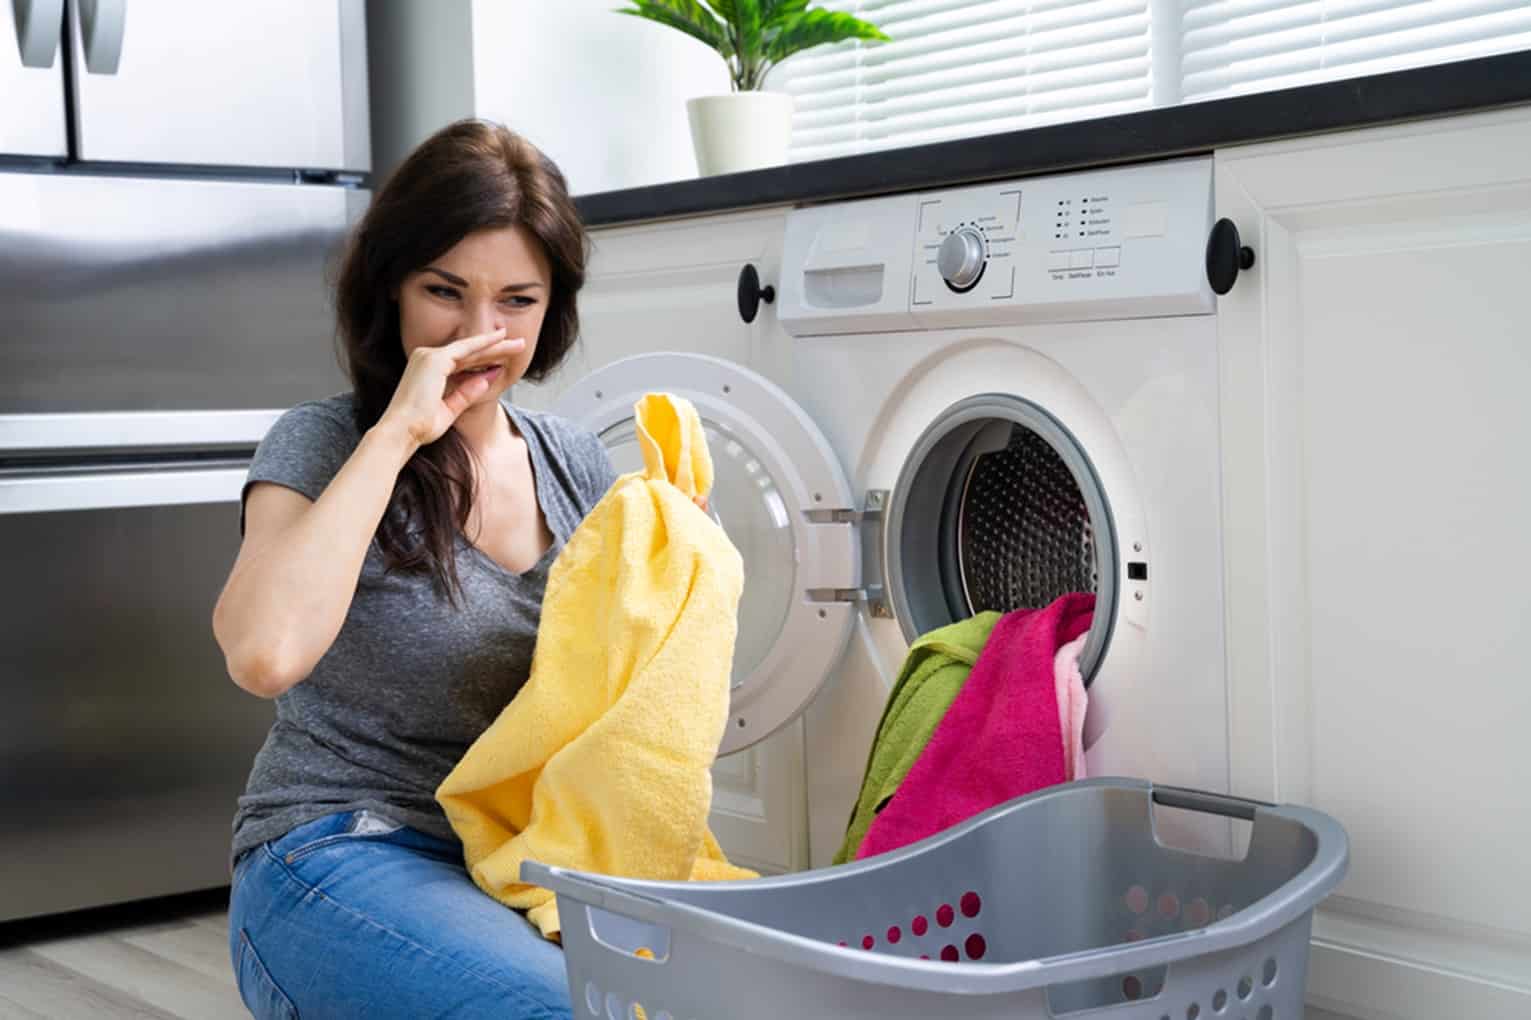 Is It Ever Okay To Leave Your Wet Laundry In The Washer Overnight?